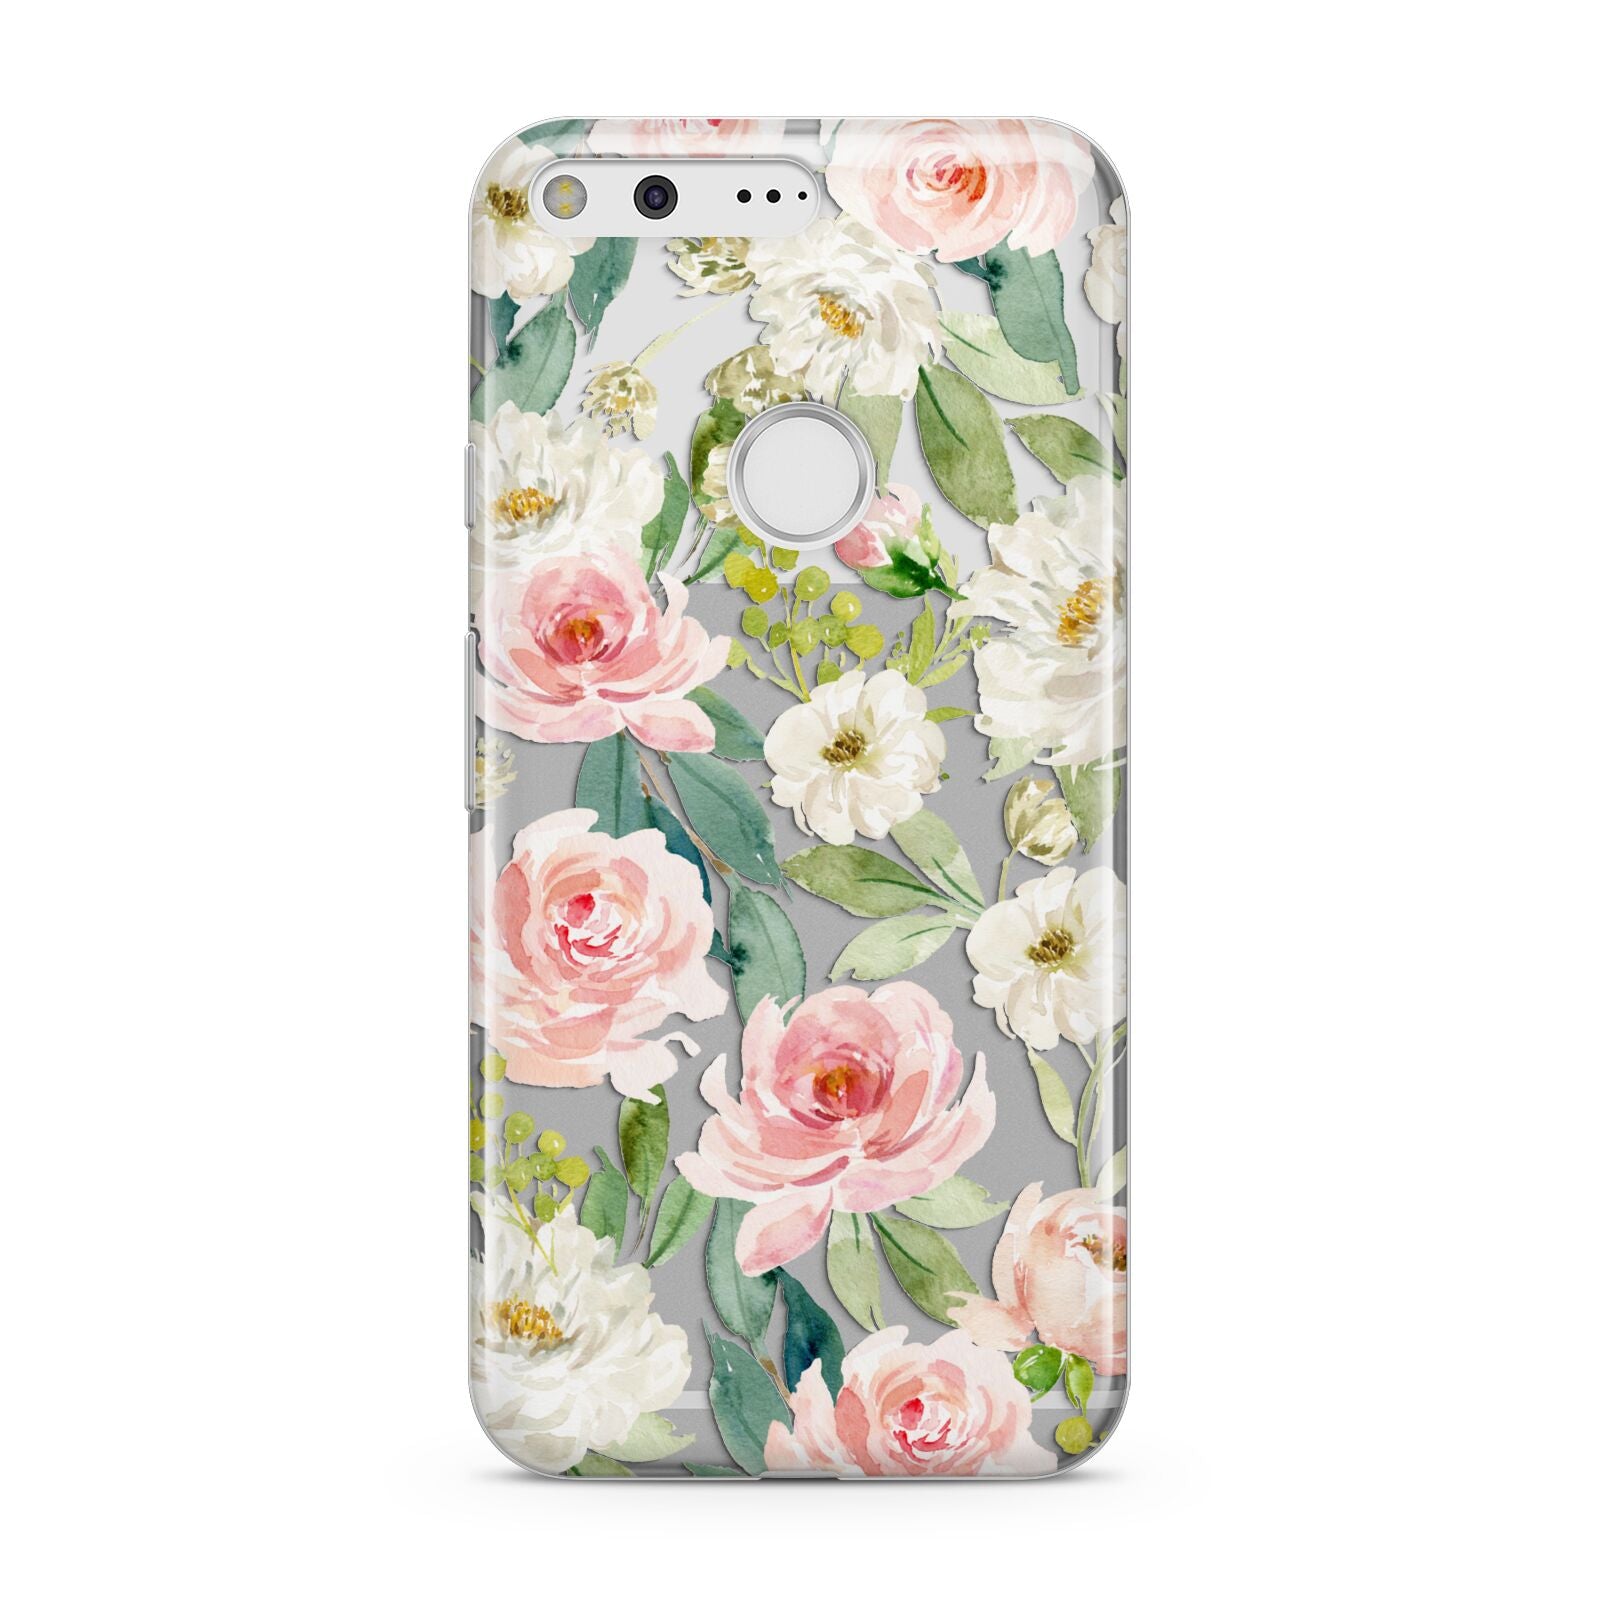 Watercolour Peonies Roses and Foliage Google Pixel Case